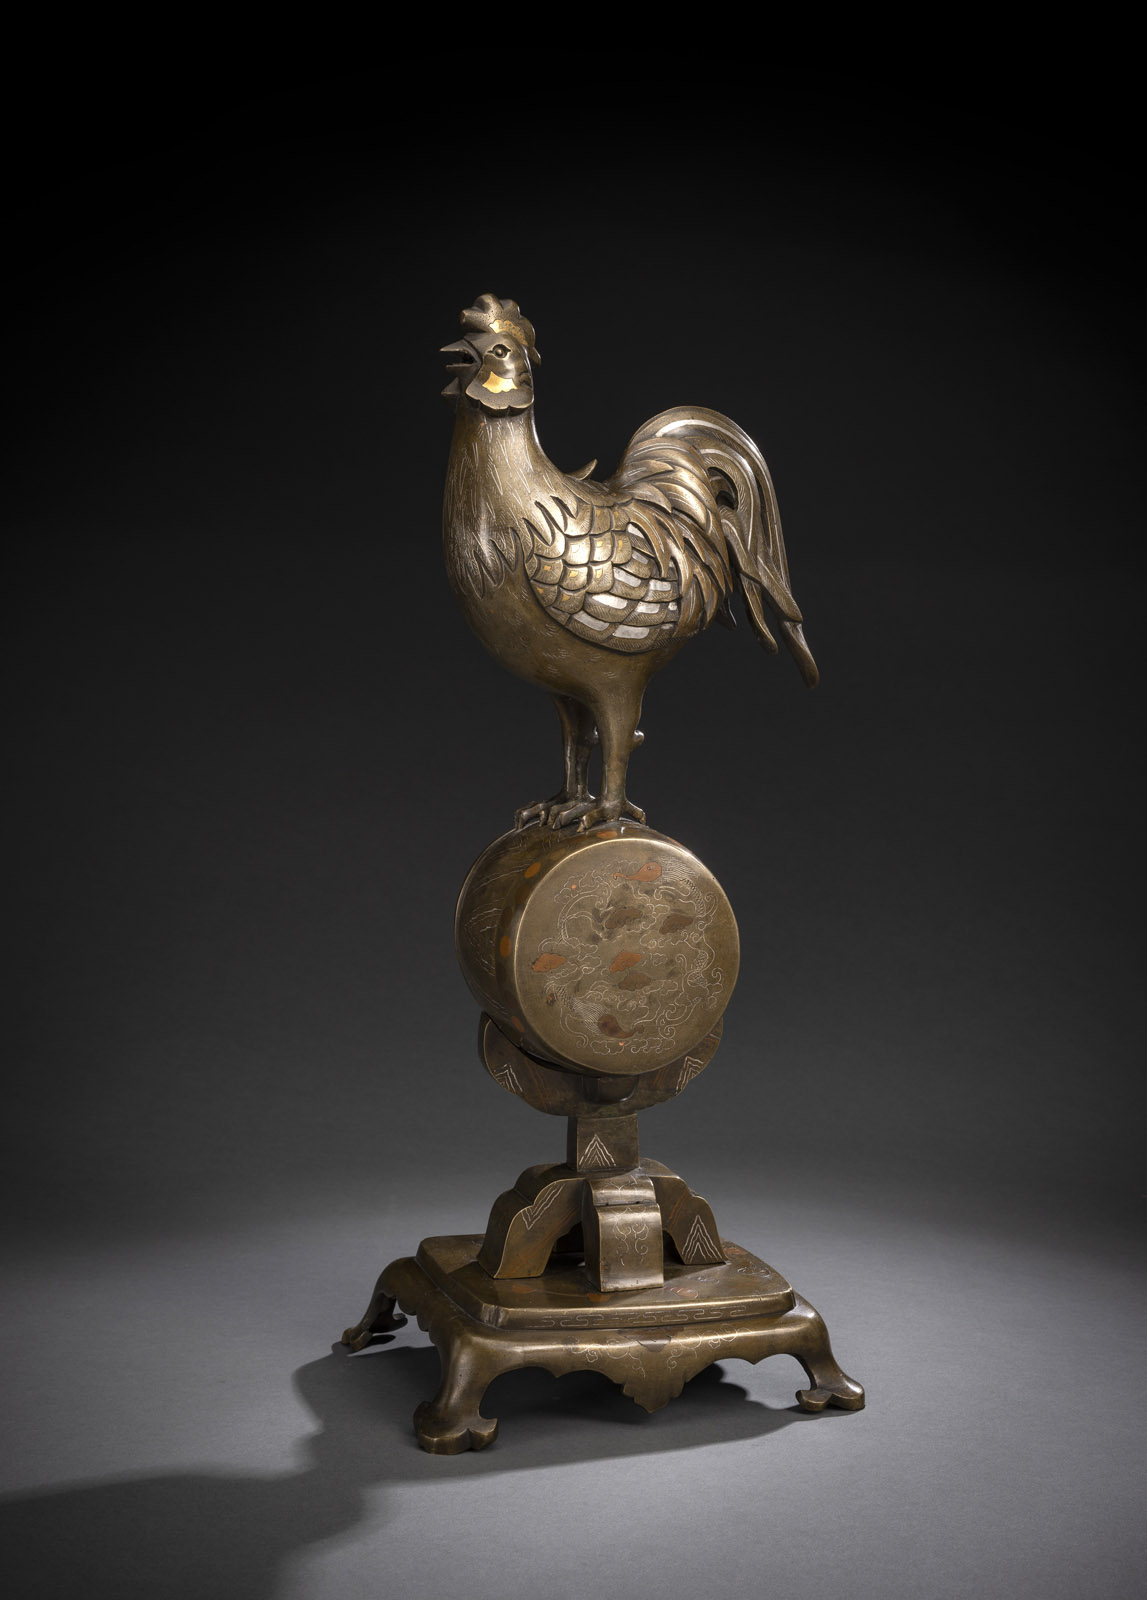 <b>A BRONZE KORO IN SHAPE OF A COCKEREL PERCHED ON A DRUM INLAID WITH GOLD, COPPER AND SILVER</b>